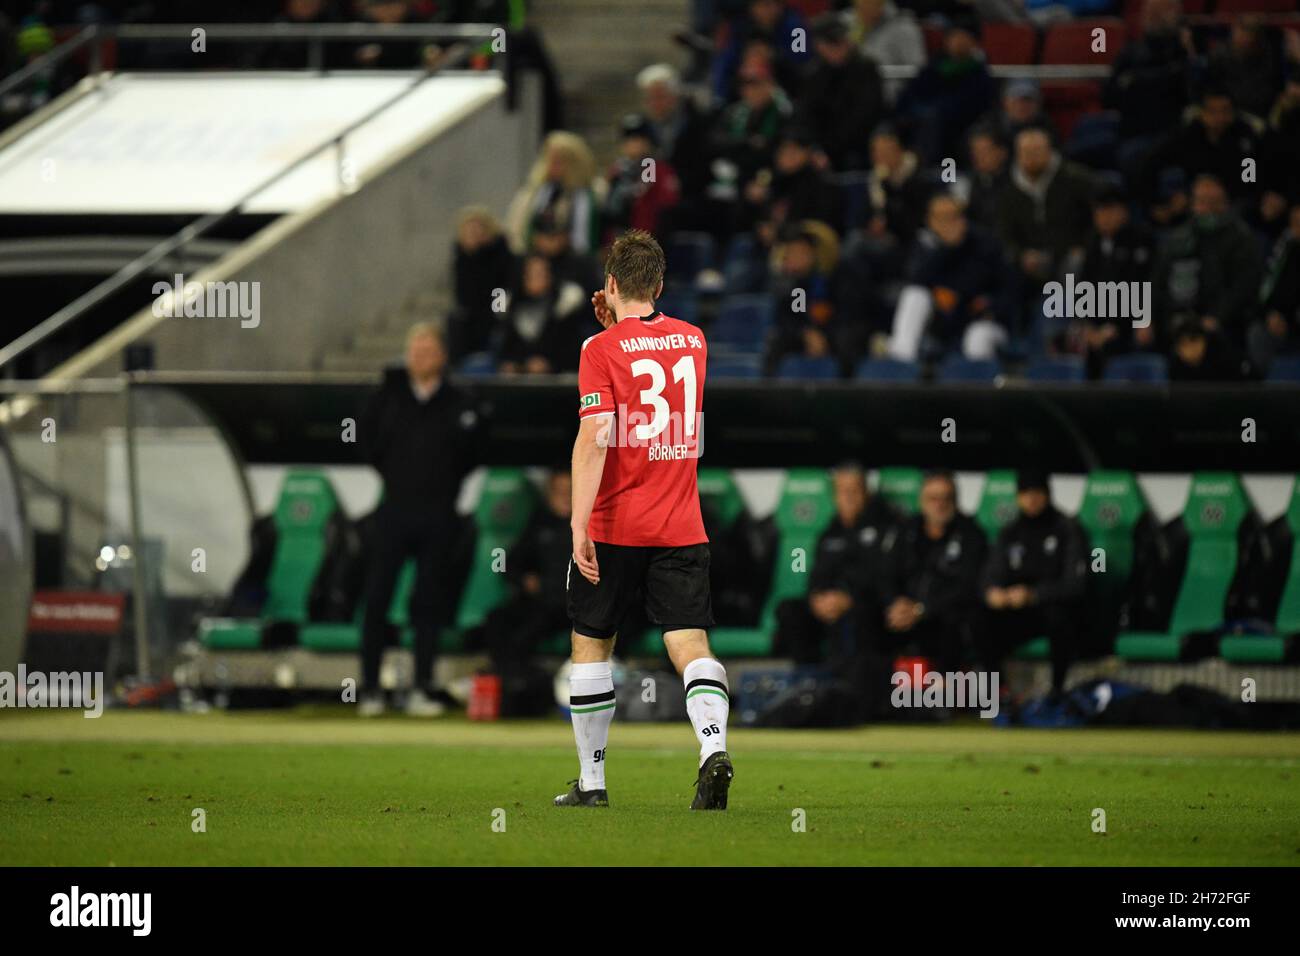 Hanover, Germany. 19th Nov, 2021. Football: 2nd Bundesliga, Matchday 14: Hannover 96 - SC Paderborn 07 at the HDI Arena. Hannover's Julian Börner leaves the pitch after receiving a red card. Credit: Daniel Reinhardt/dpa - IMPORTANT NOTE: In accordance with the regulations of the DFL Deutsche Fußball Liga and/or the DFB Deutscher Fußball-Bund, it is prohibited to use or have used photographs taken in the stadium and/or of the match in the form of sequence pictures and/or video-like photo series./dpa/Alamy Live News Stock Photo